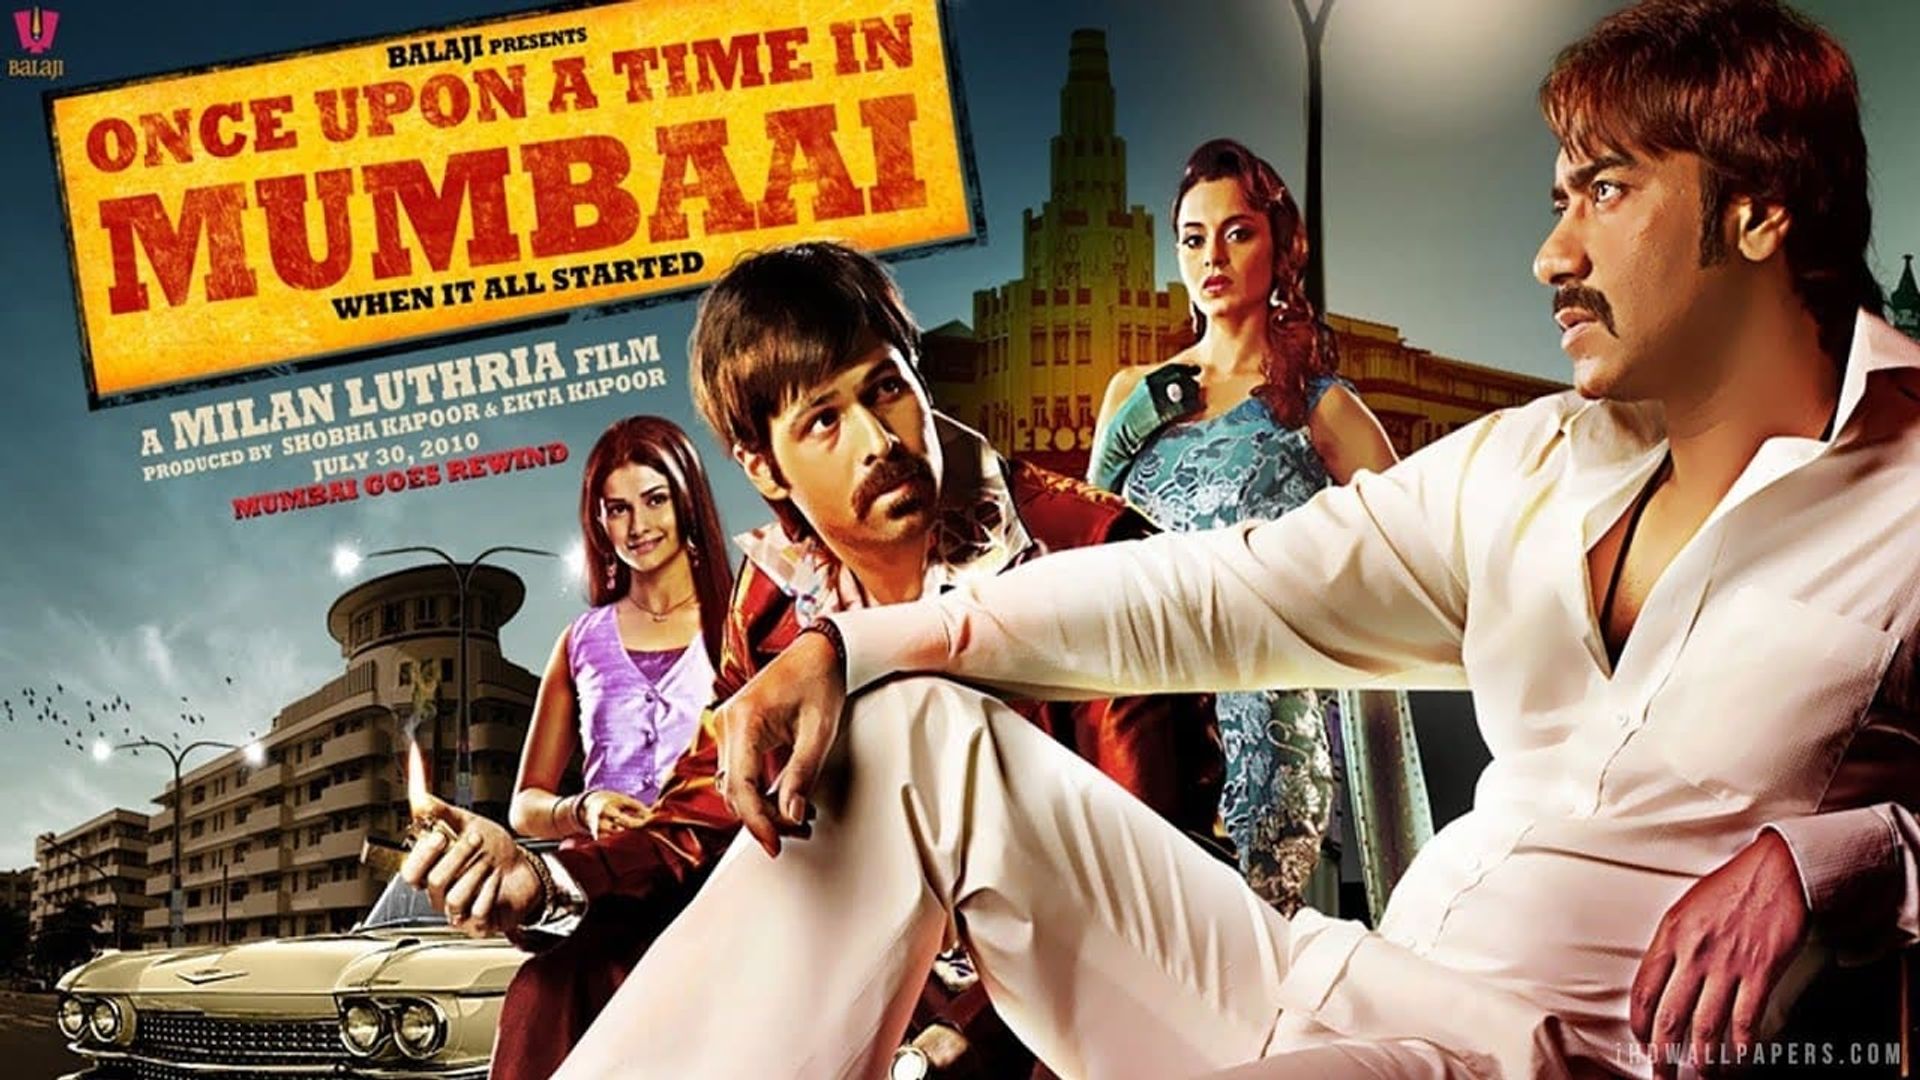 Once Upon a Time in Mumbaai background